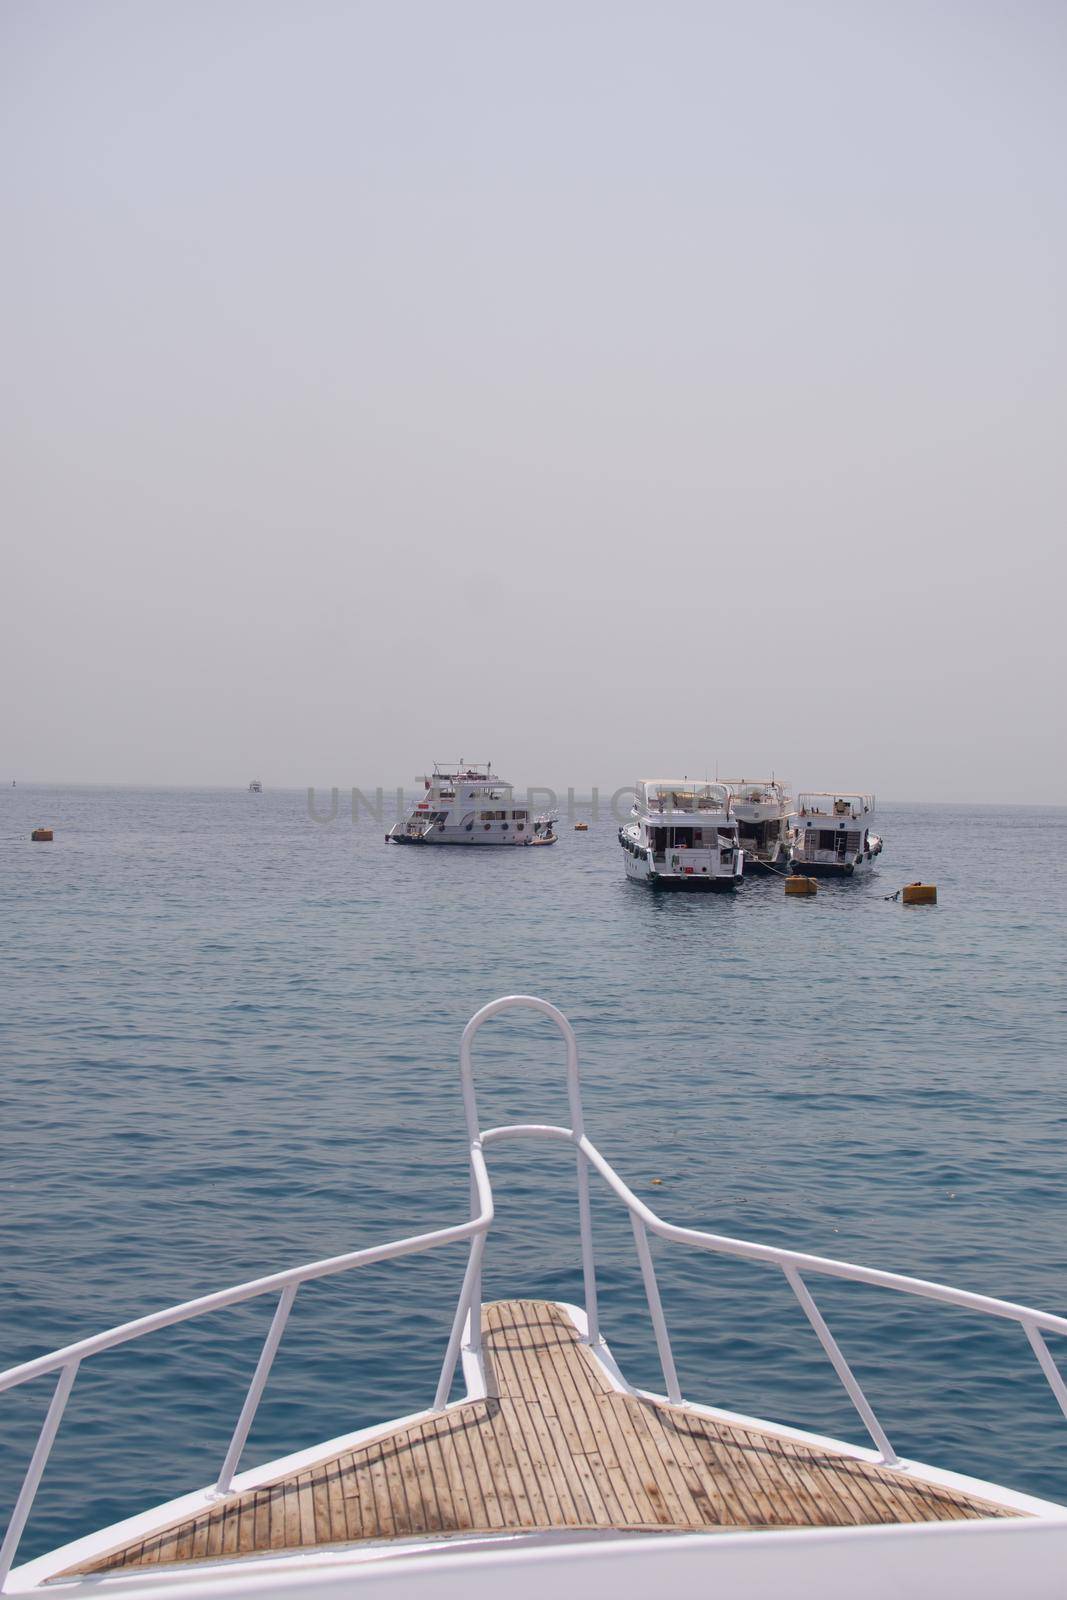 the bow of the yacht. close-up view from the deck. there are other yachts ahead. red sea, Egypt. vertical photo.